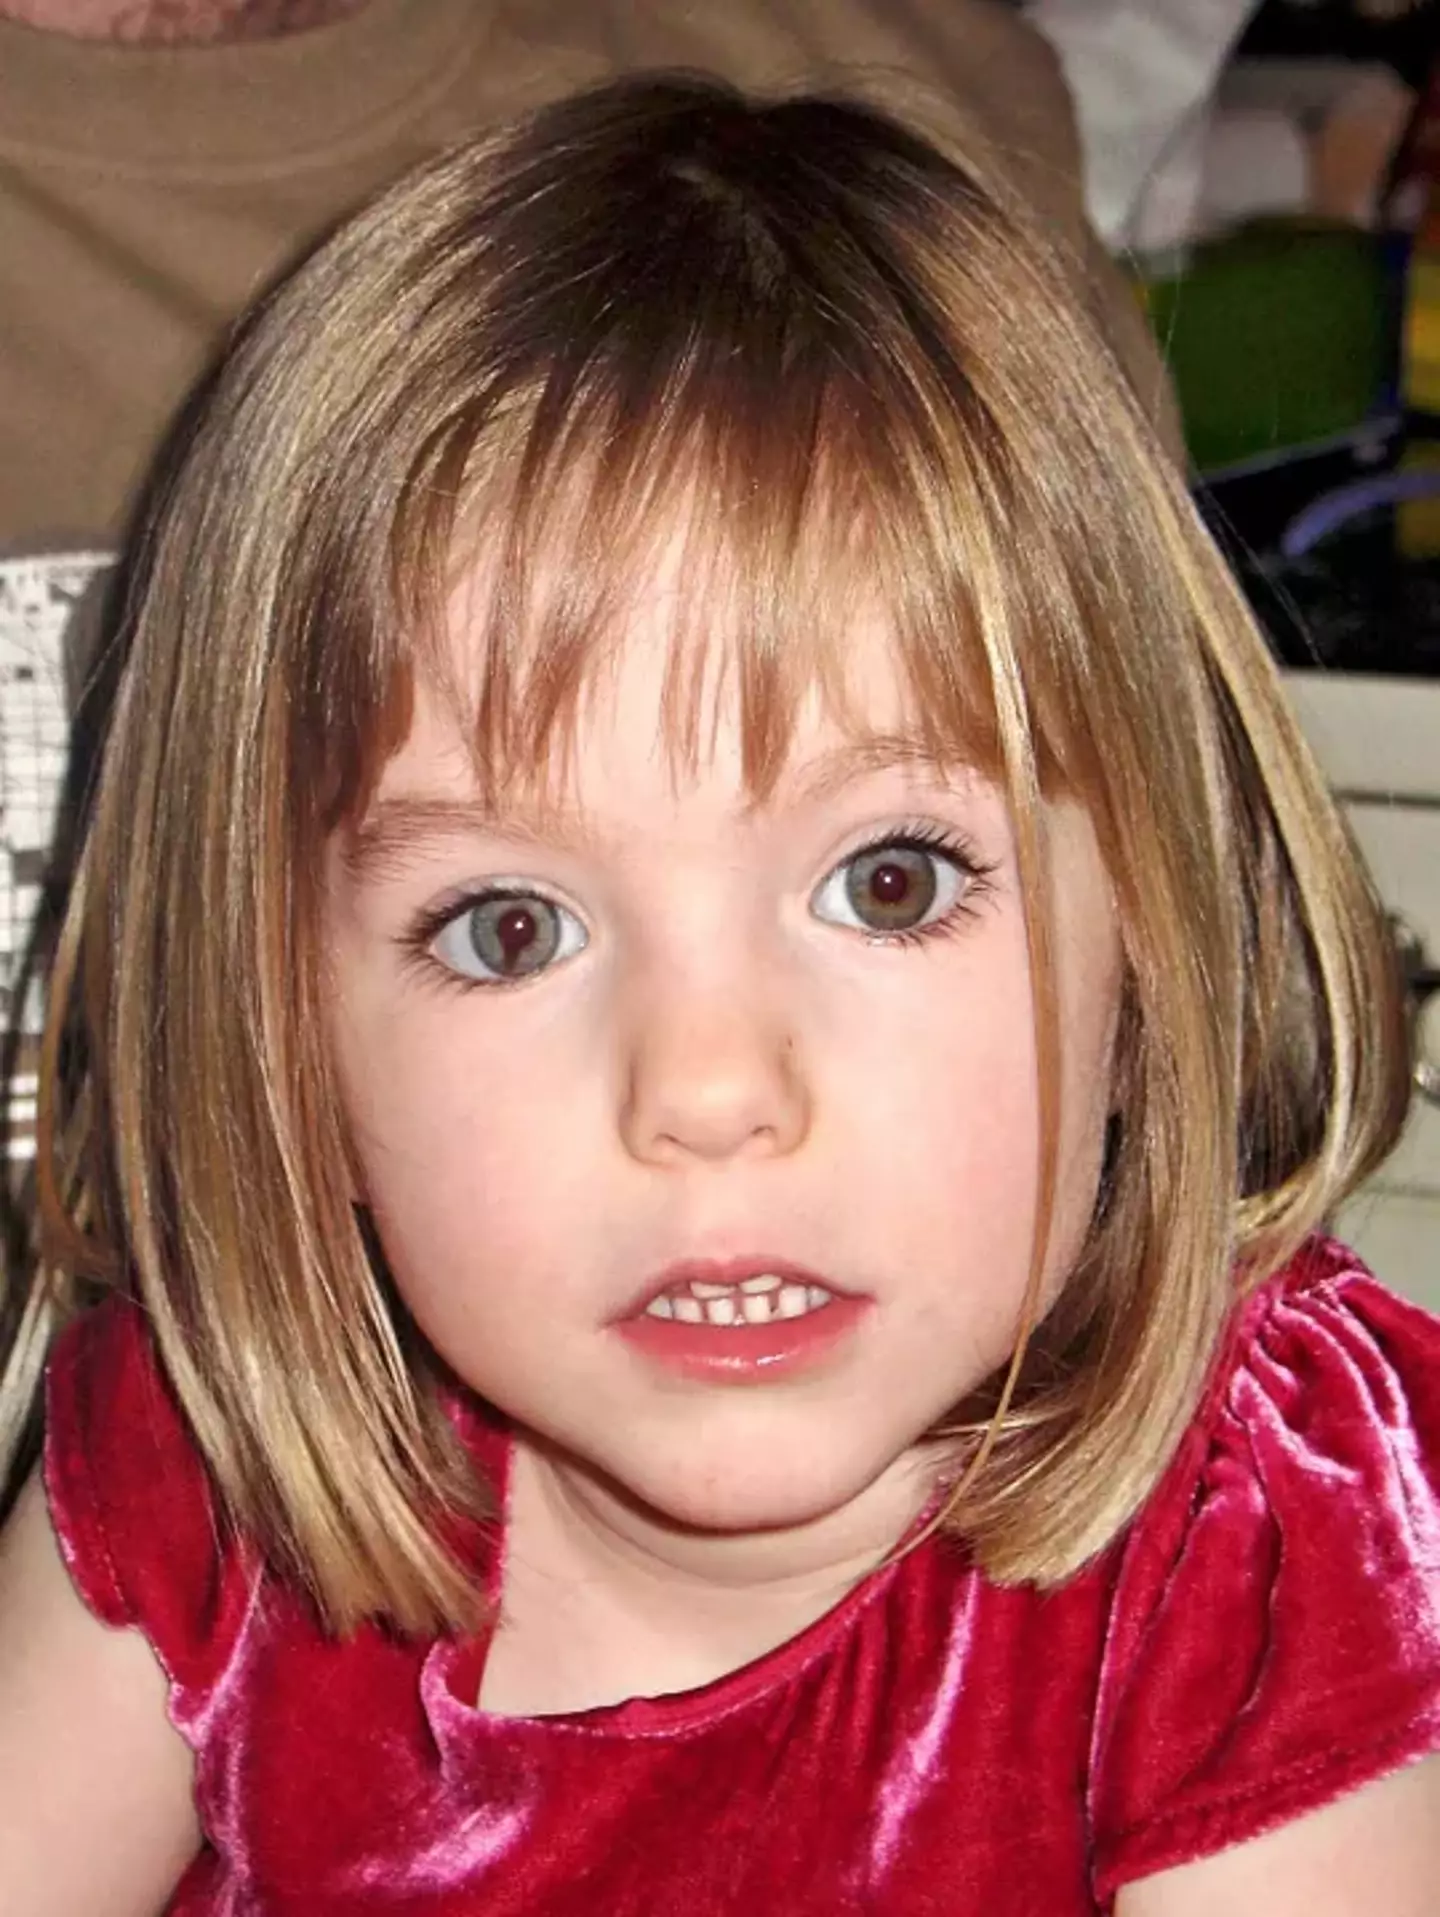 Madeleine McCann went missing from Portugal back in 2007.